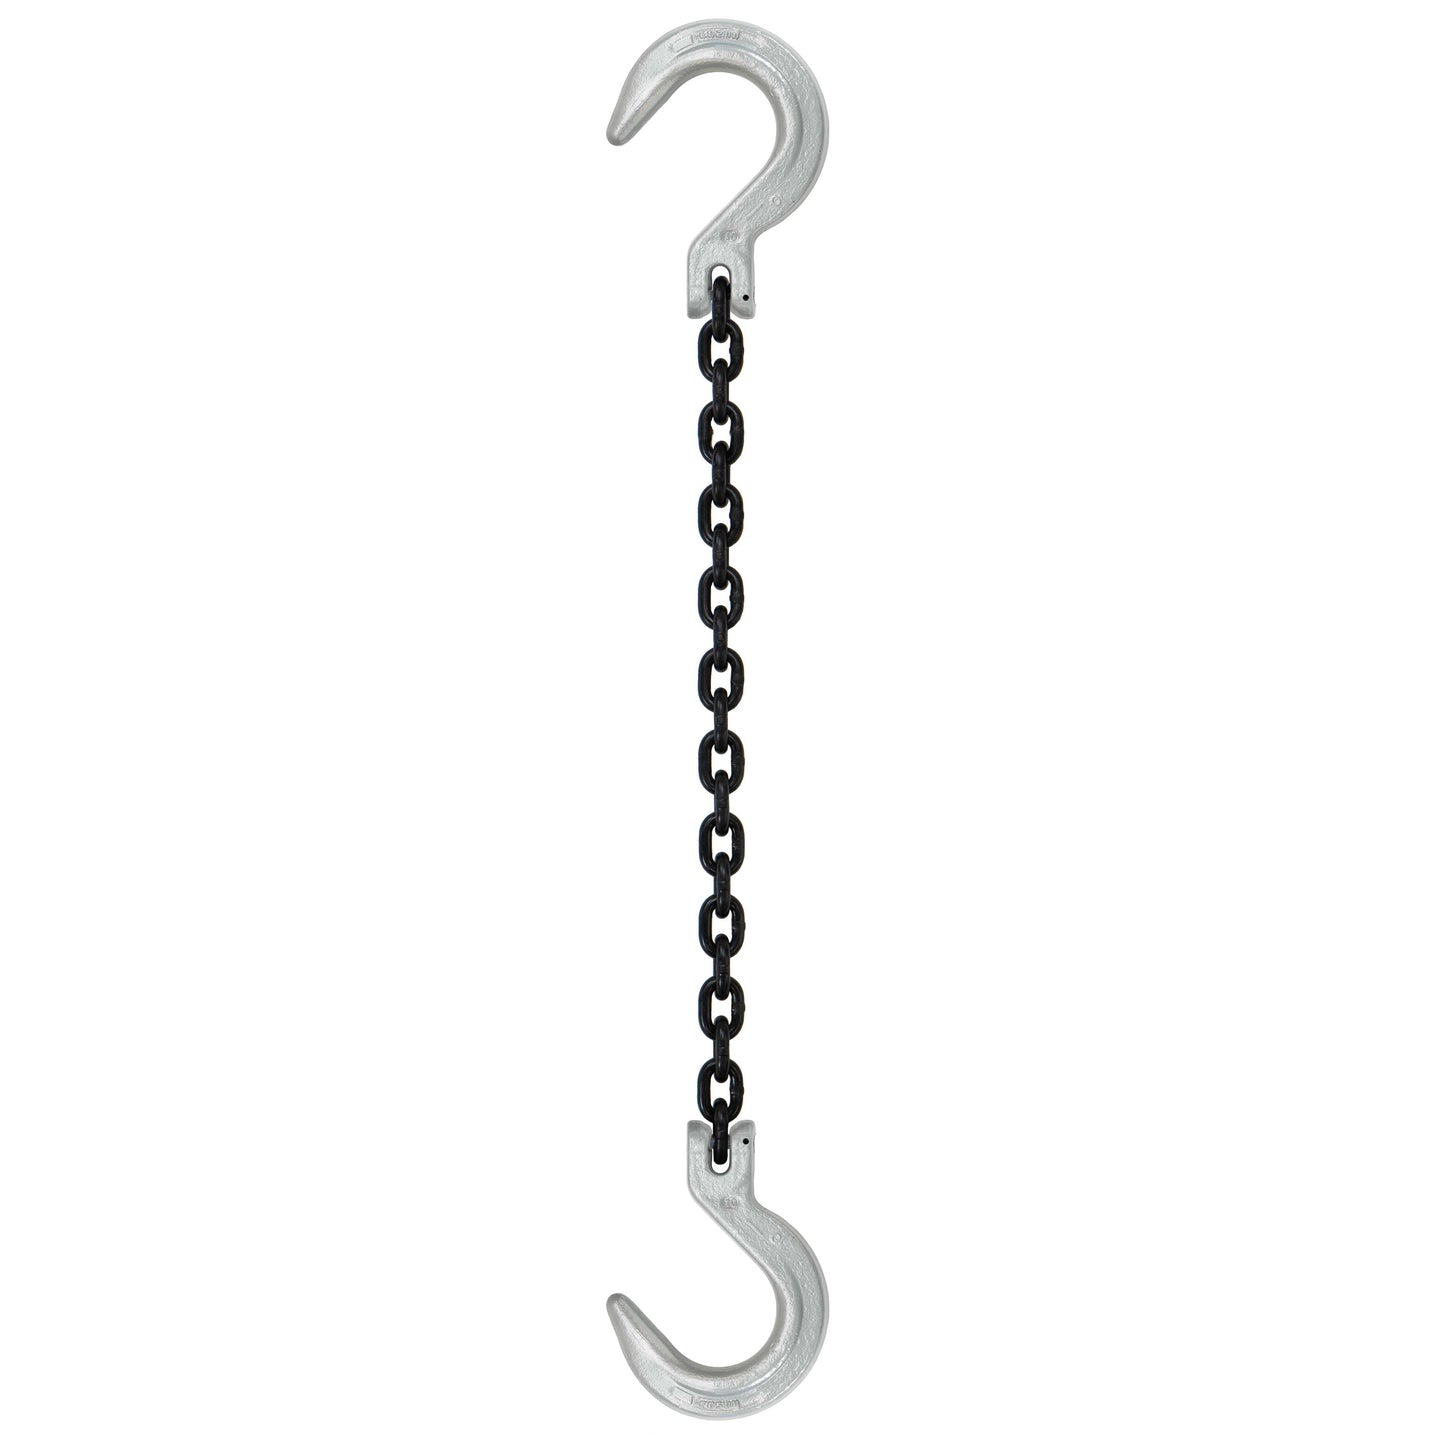 12 inch x 18 foot Domestic Single Leg Chain Sling w Crosby Foundry & Foundry Hooks Grade 100 image 1 of 2